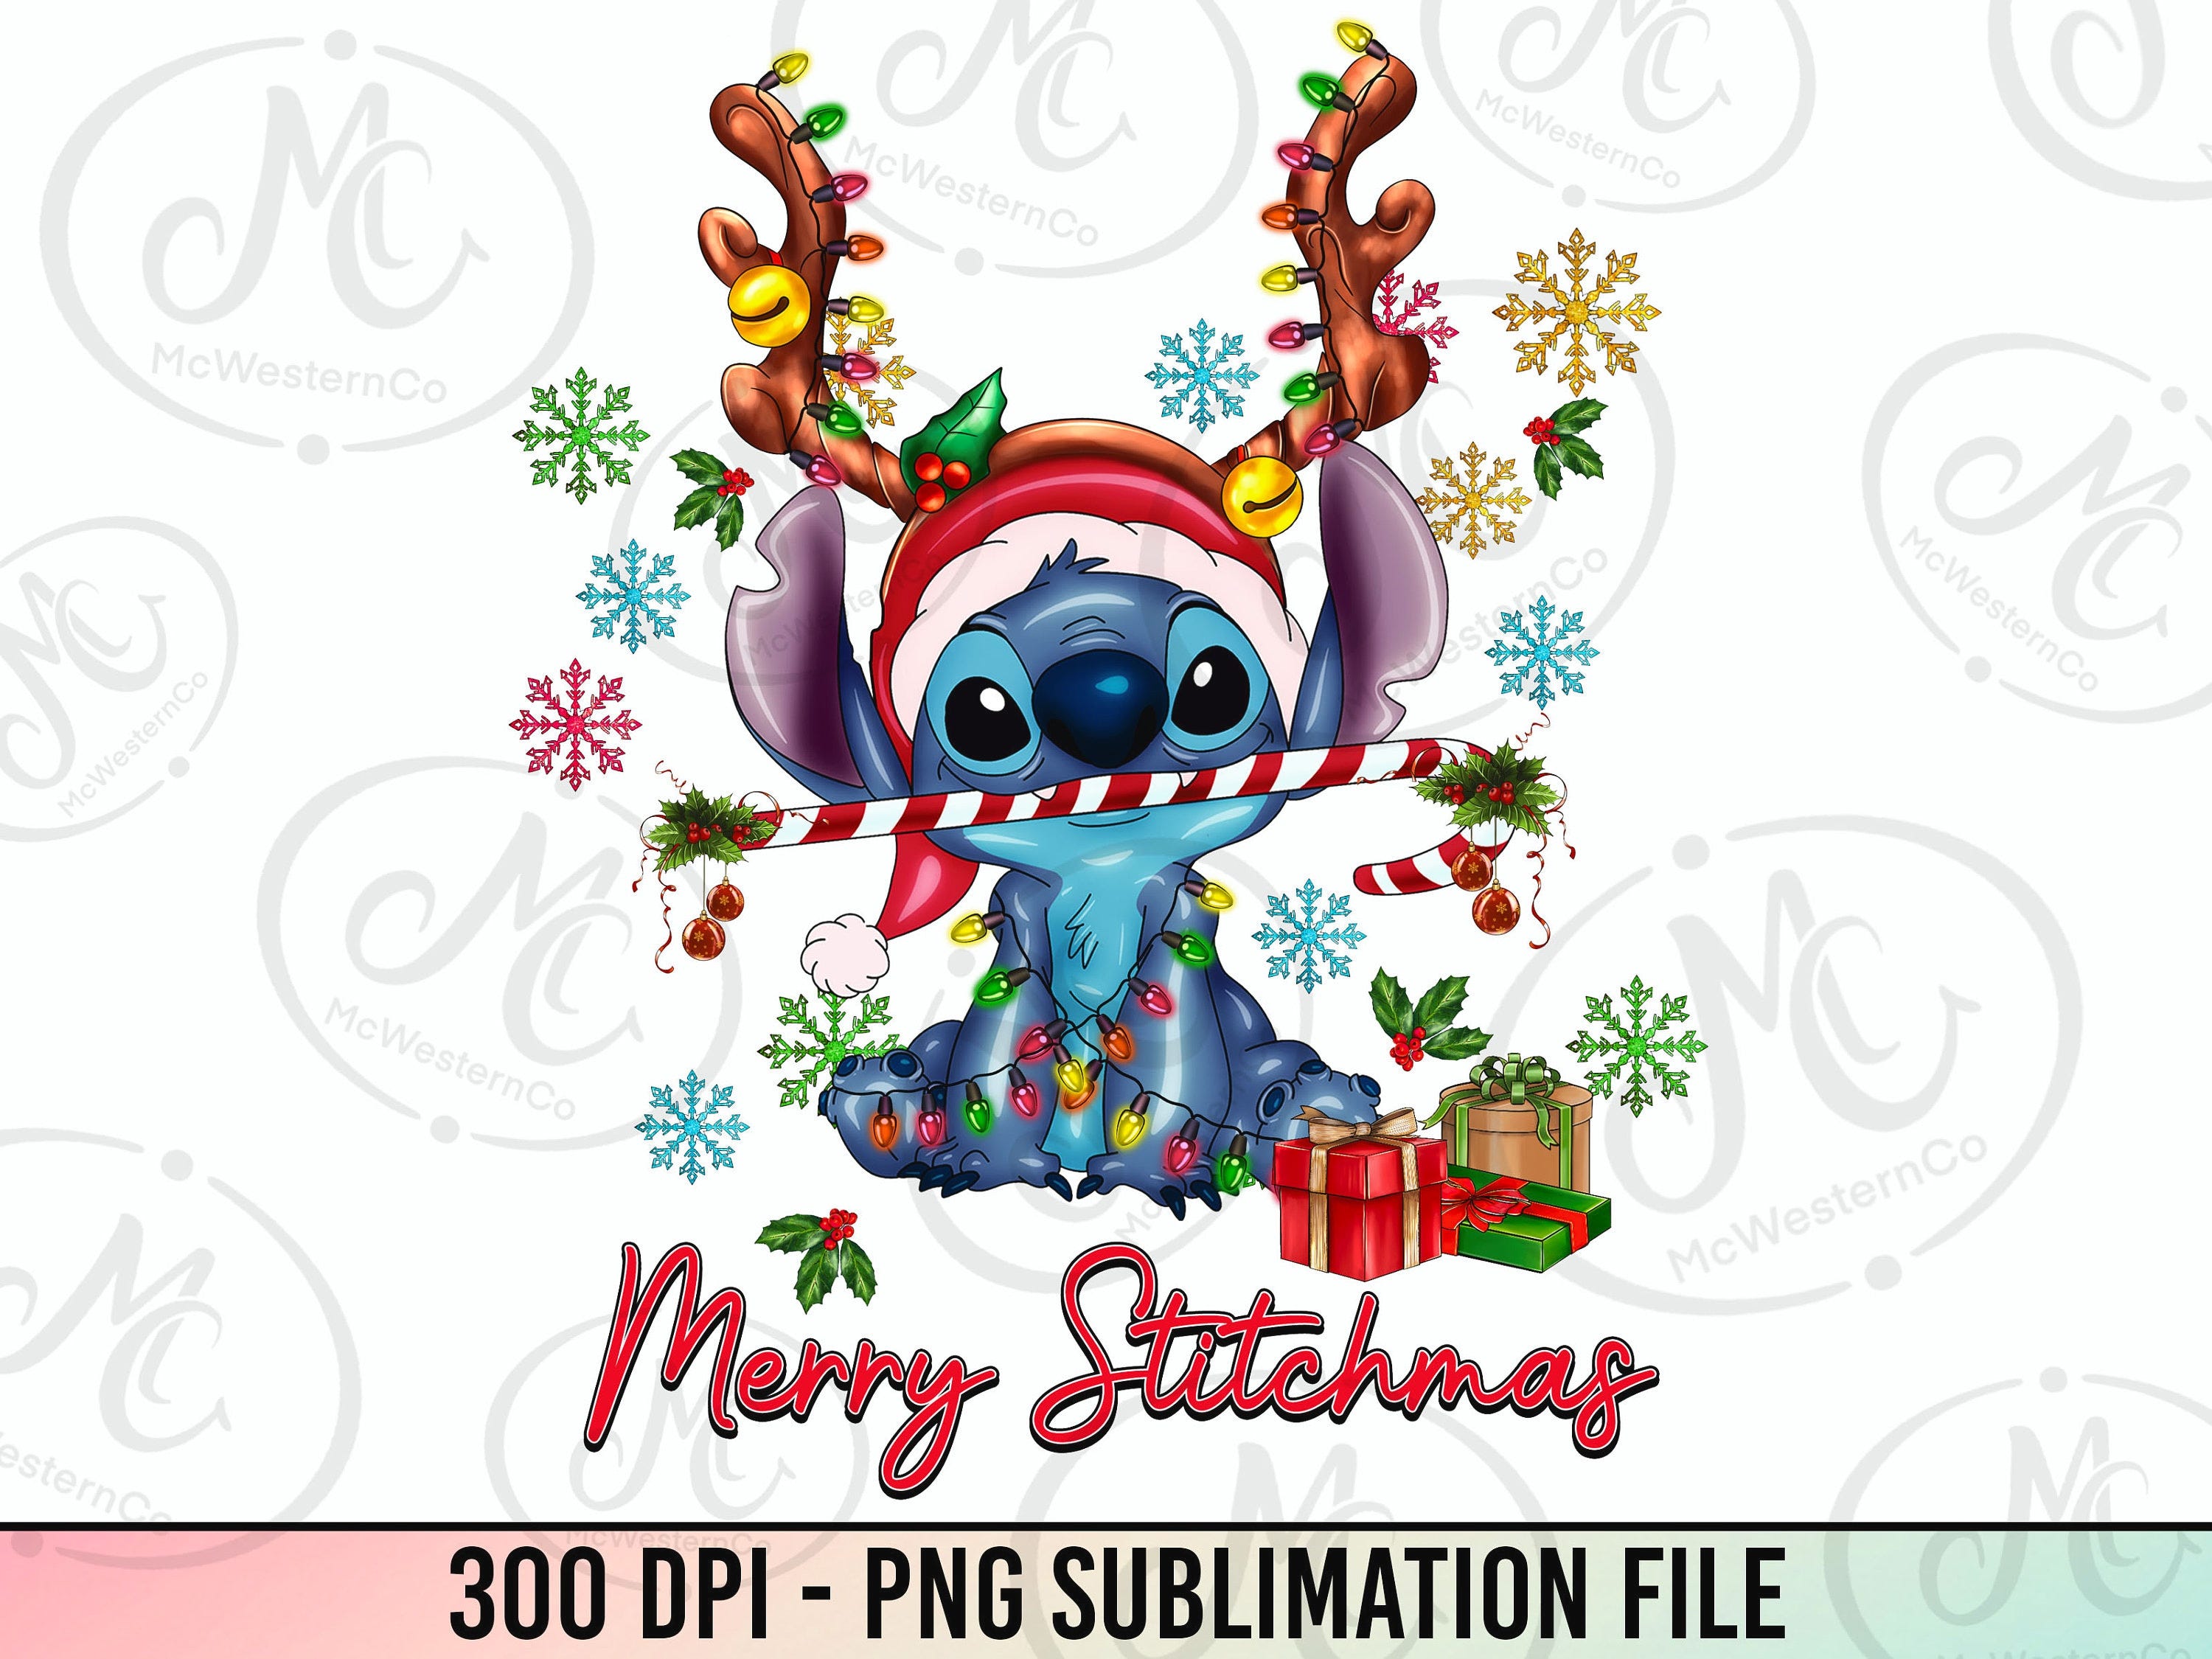 Love Christmas Stitch, Merry Christmas Png, Christmas Vibes Png, Family Christmas Png, Family Vacation Christmas, Xmas Png, Christmas Stitch